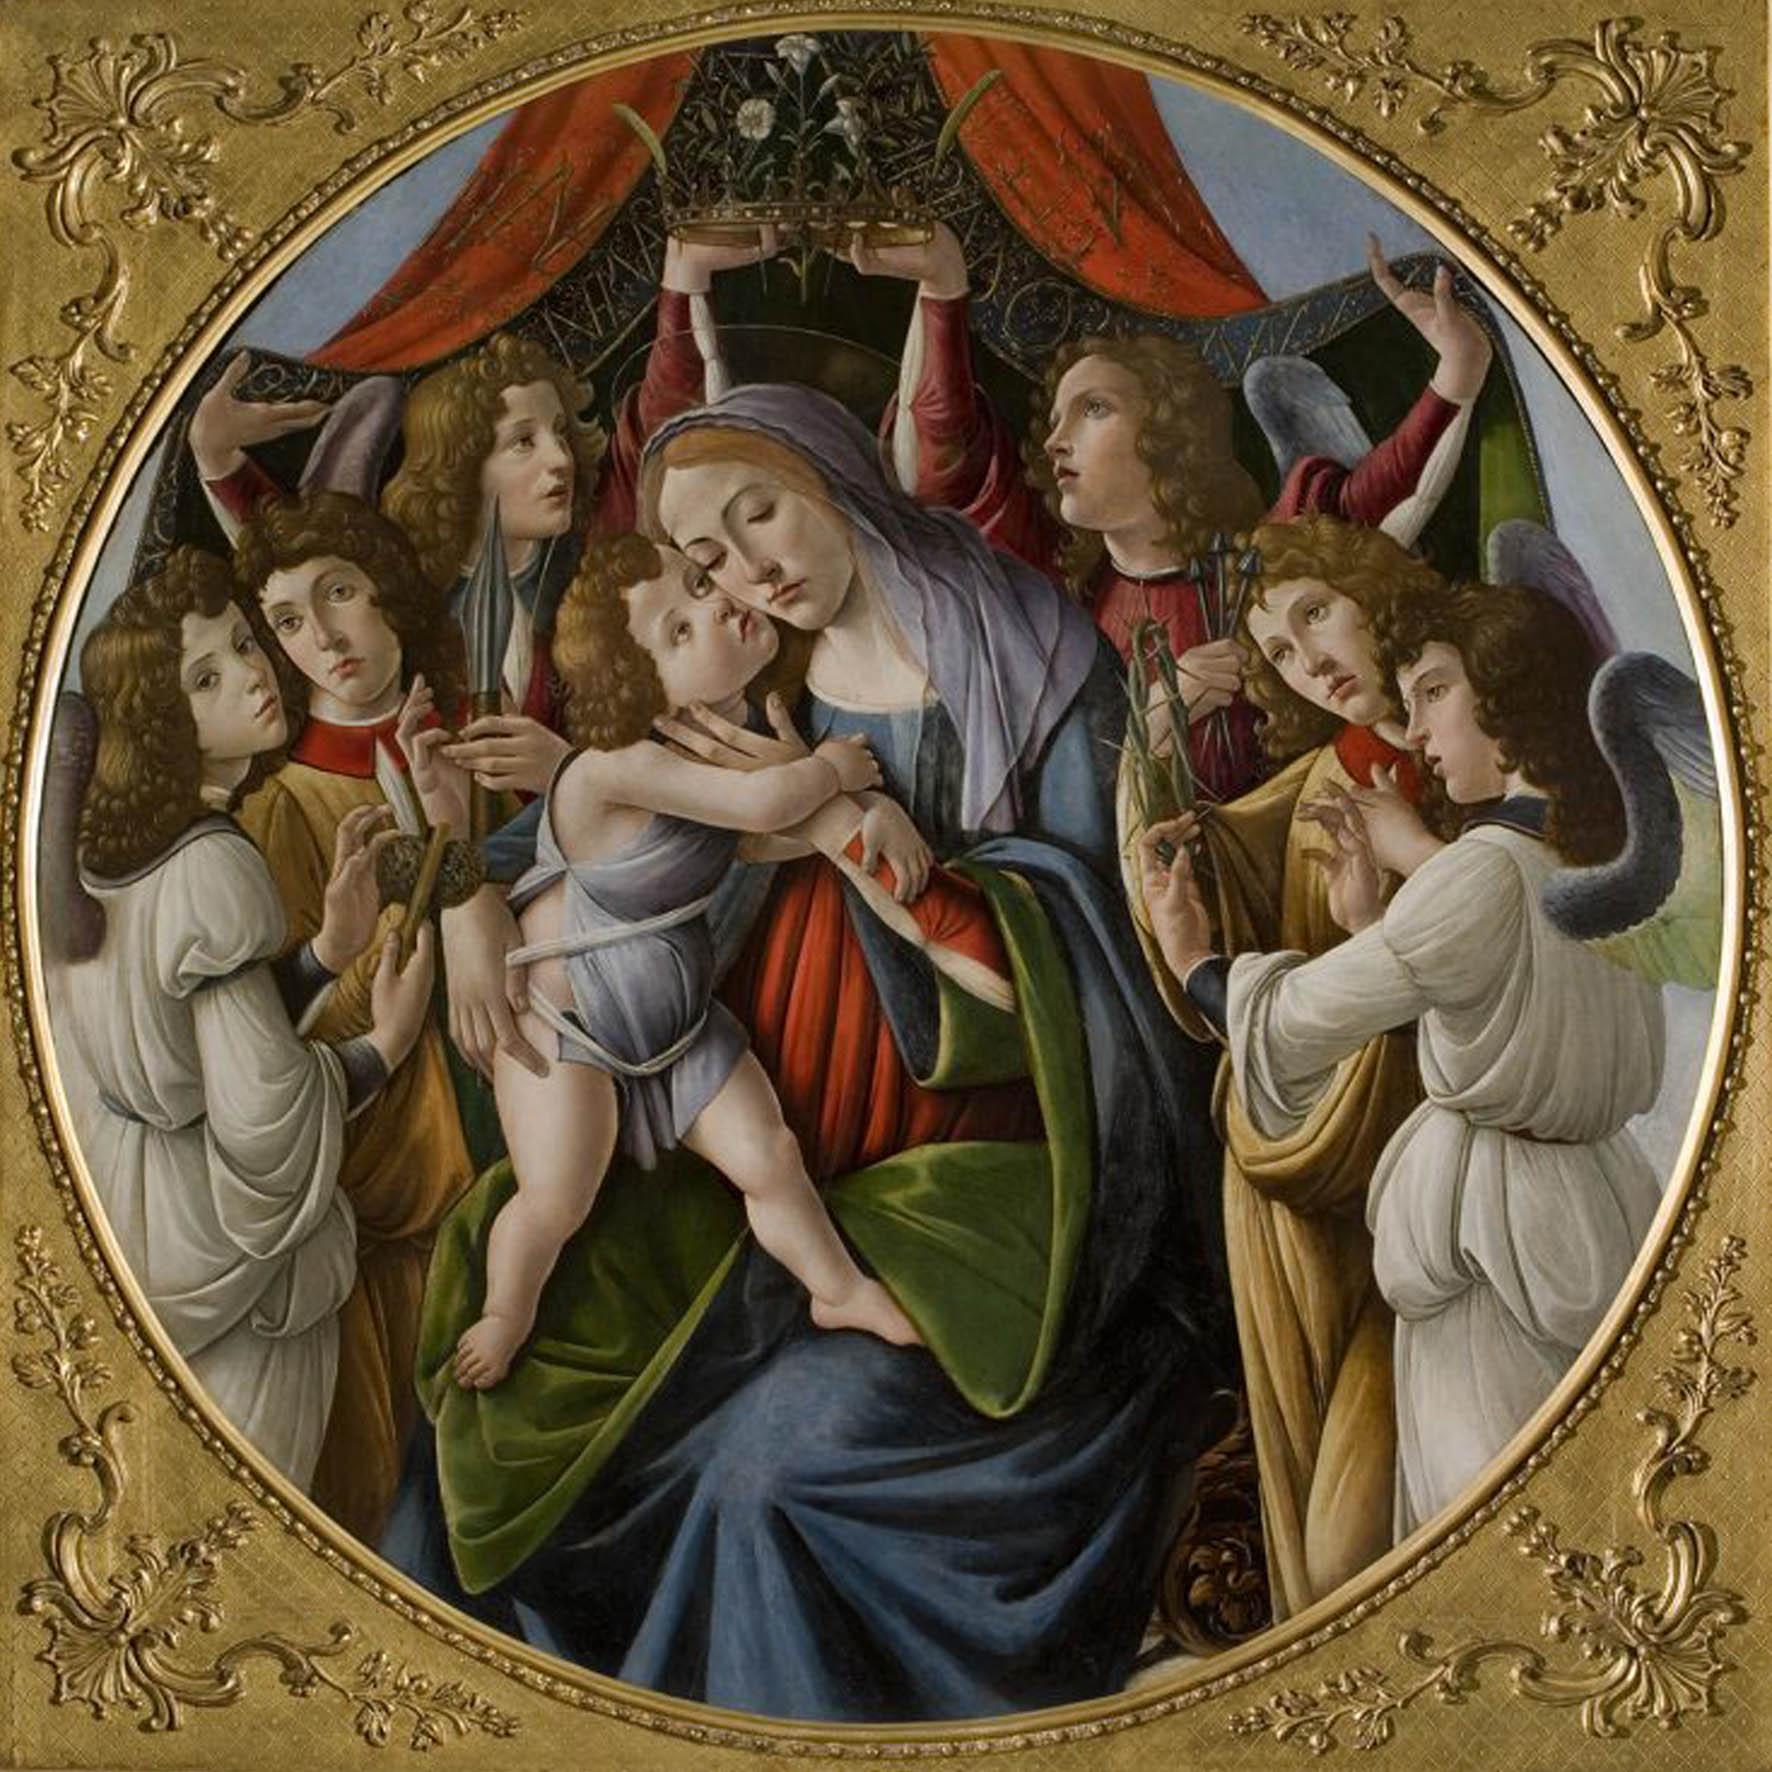 BOTTICELLI: MADONNA AND CHILD WITH SIX ANGELS